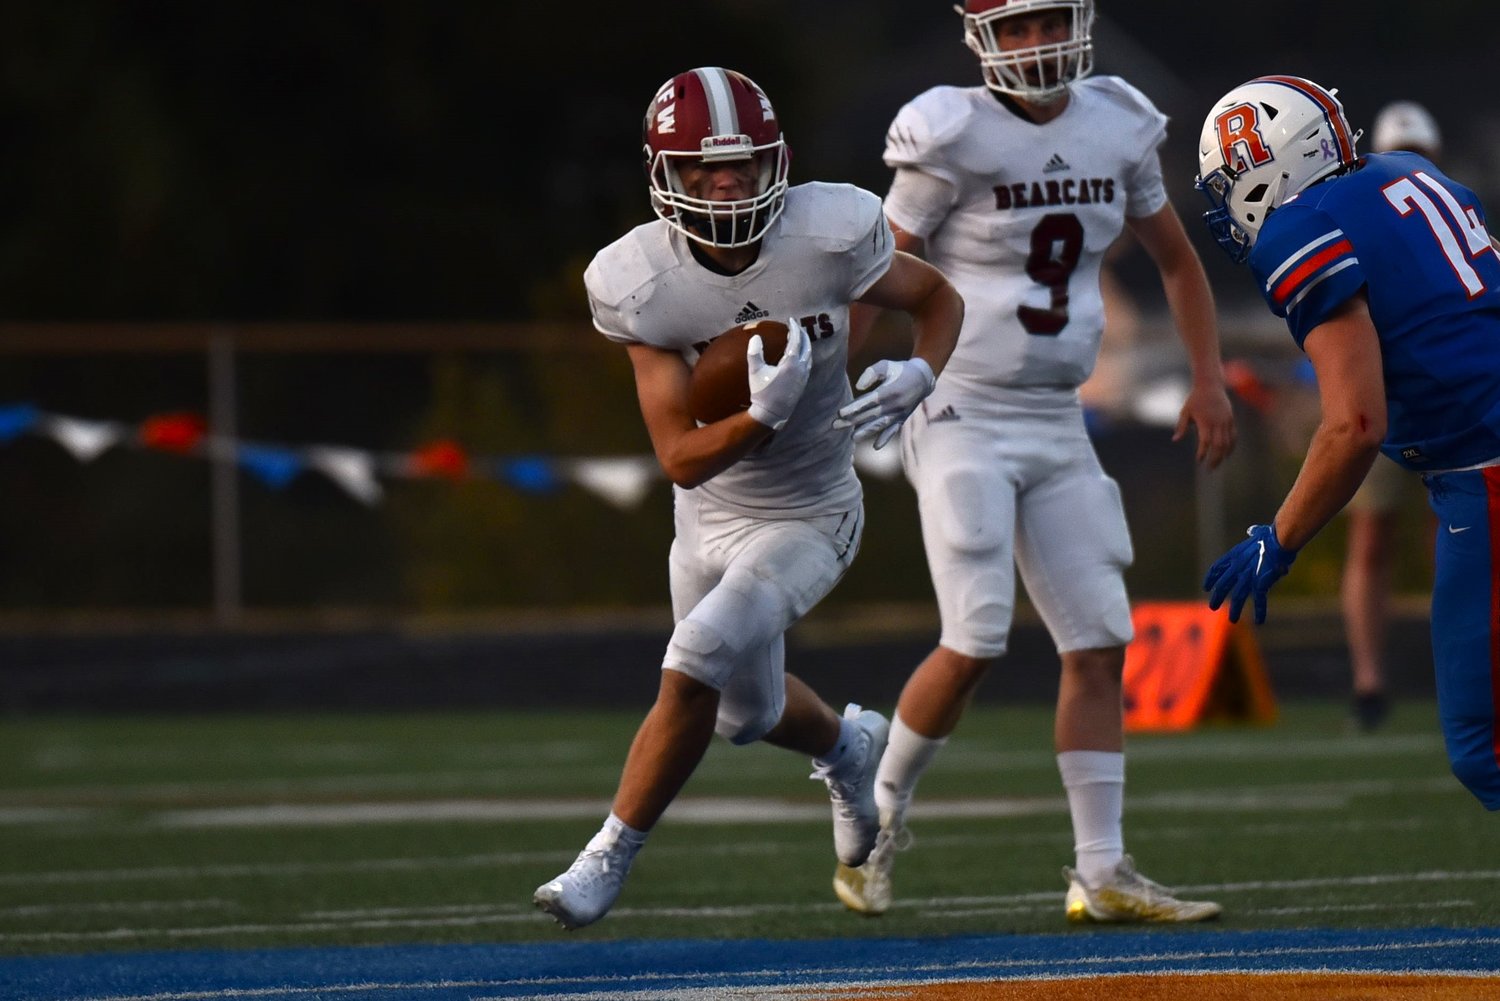 Tucker Land carries the ball in the first half of W.F. West's 38-28 win over Ridgefield, on Sept. 3.